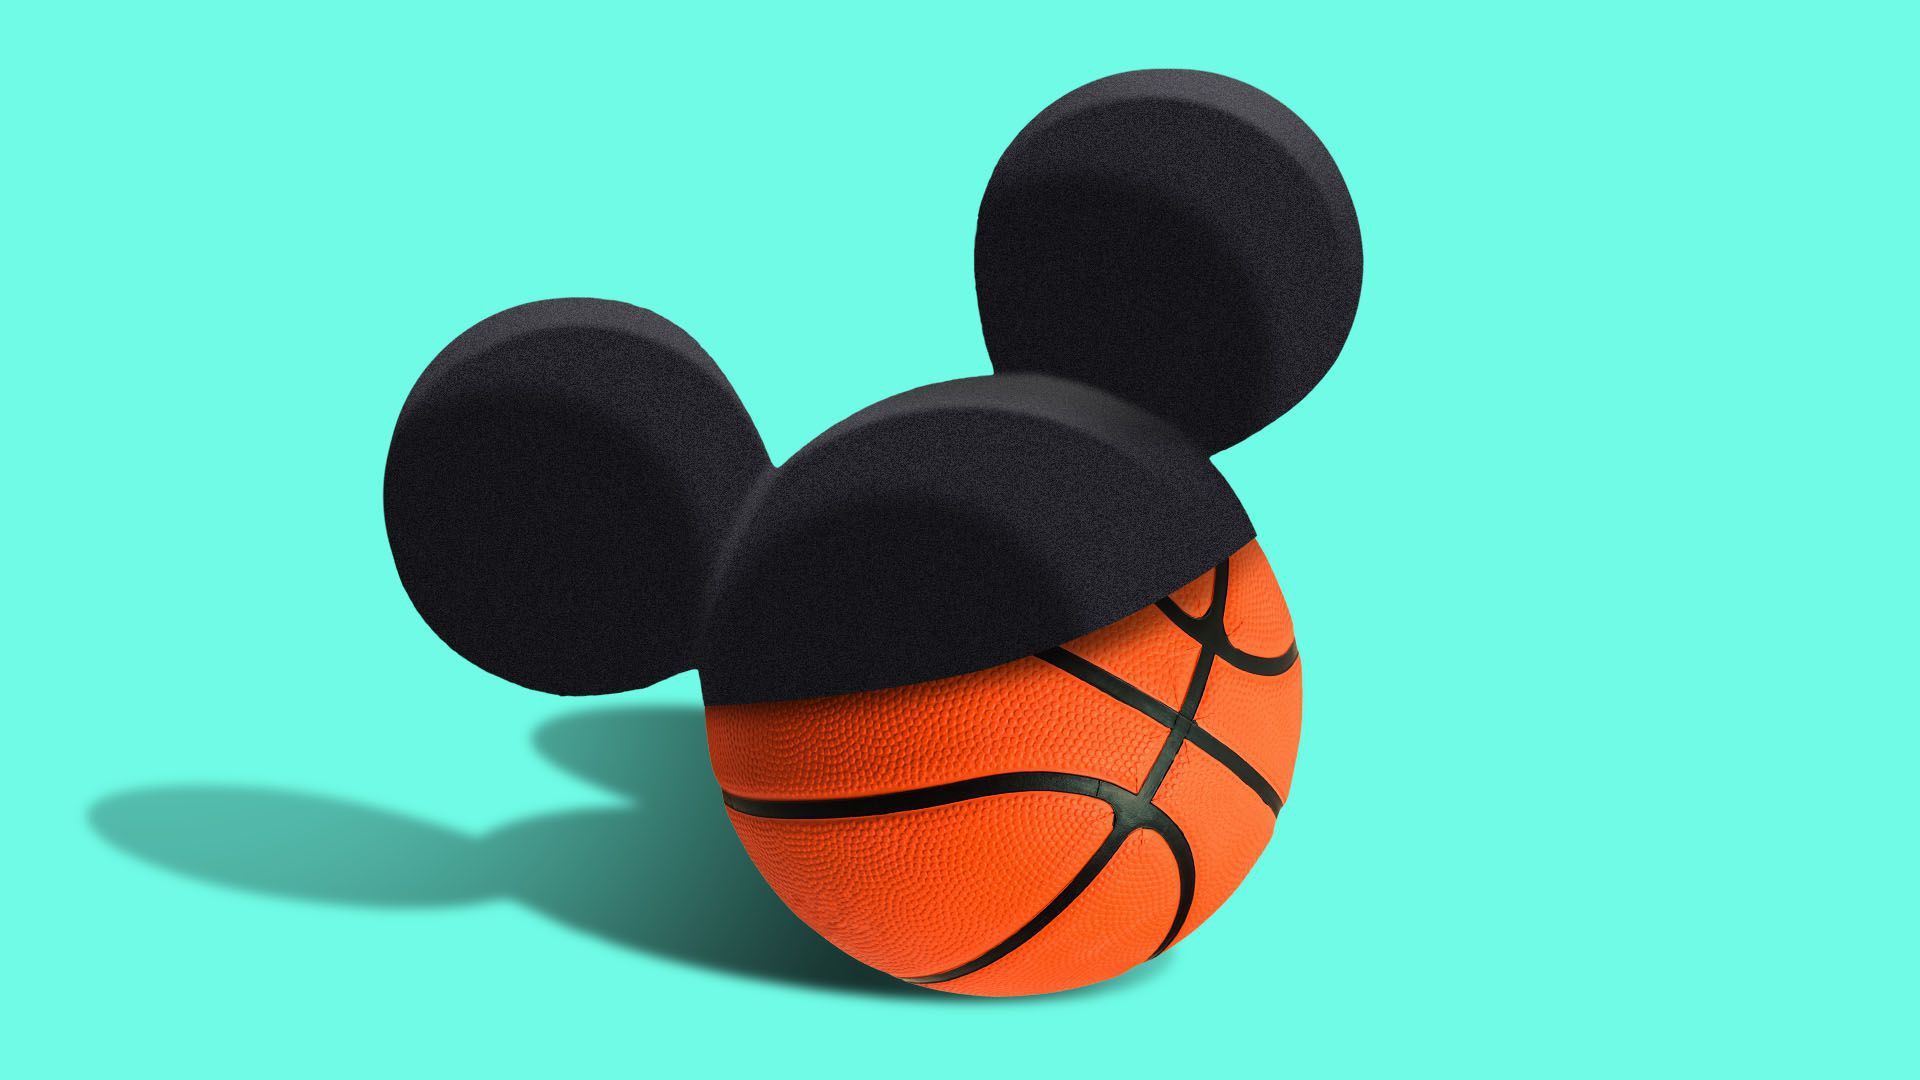 Illustration of a basketball with Mickey Mouse ears.